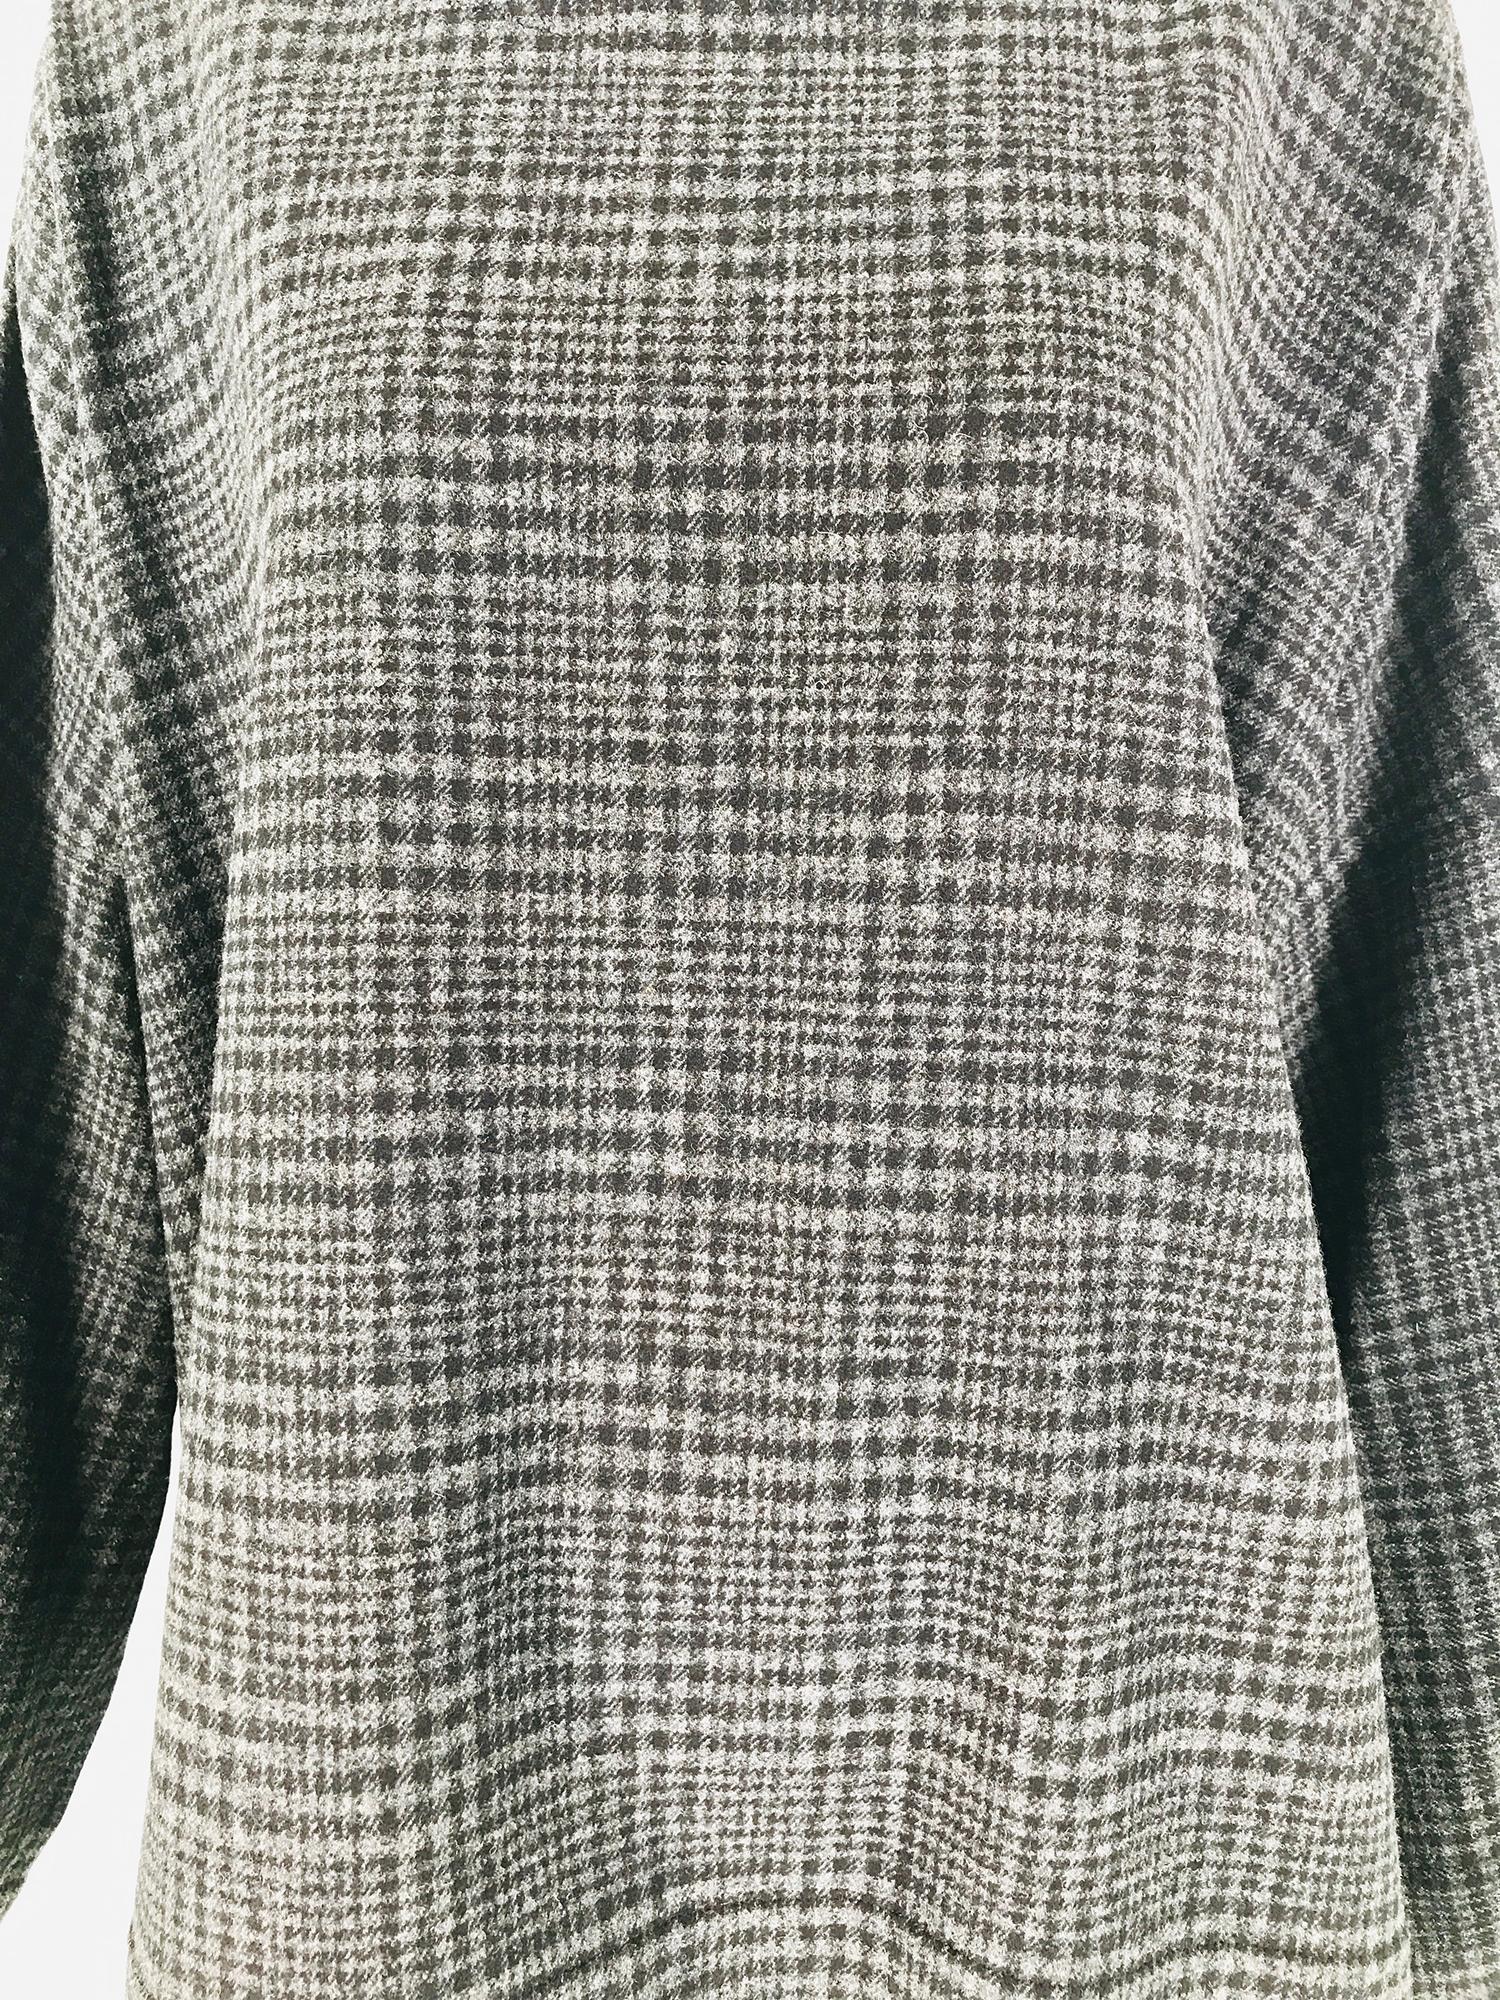 Lanvin Hiver 2015 grey wool blend plaid oversize kimono sleeve top.
Pull on top with a jewel neckline, the back closes at the neck with a zipper. Full over size top has wide kimono style sleeves, the body of the top is loose, there is a coordinating